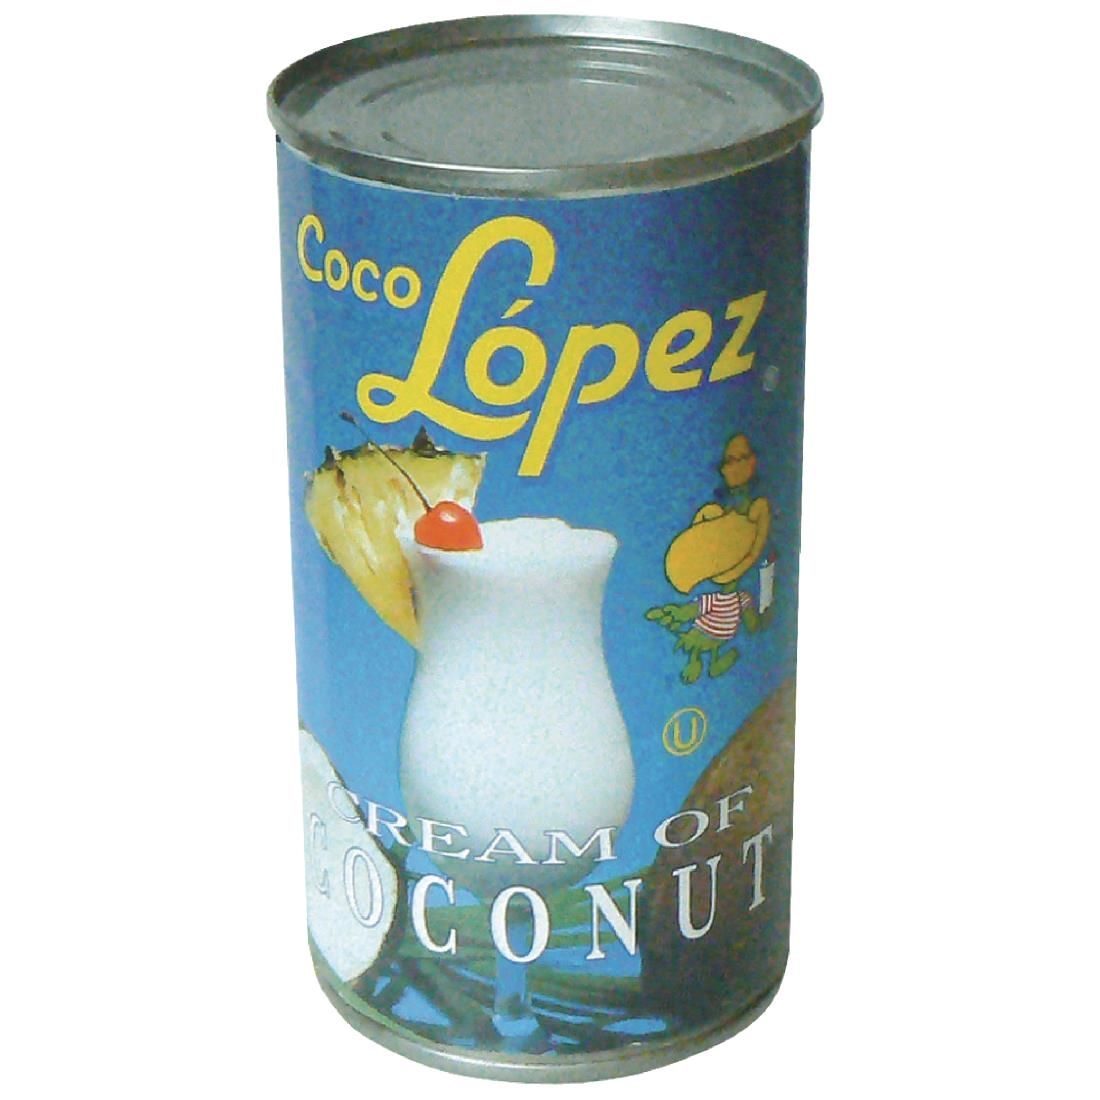 Coco Lopez Cream of Coconut Cocktail Mix JD Catering Equipment Solutions Ltd